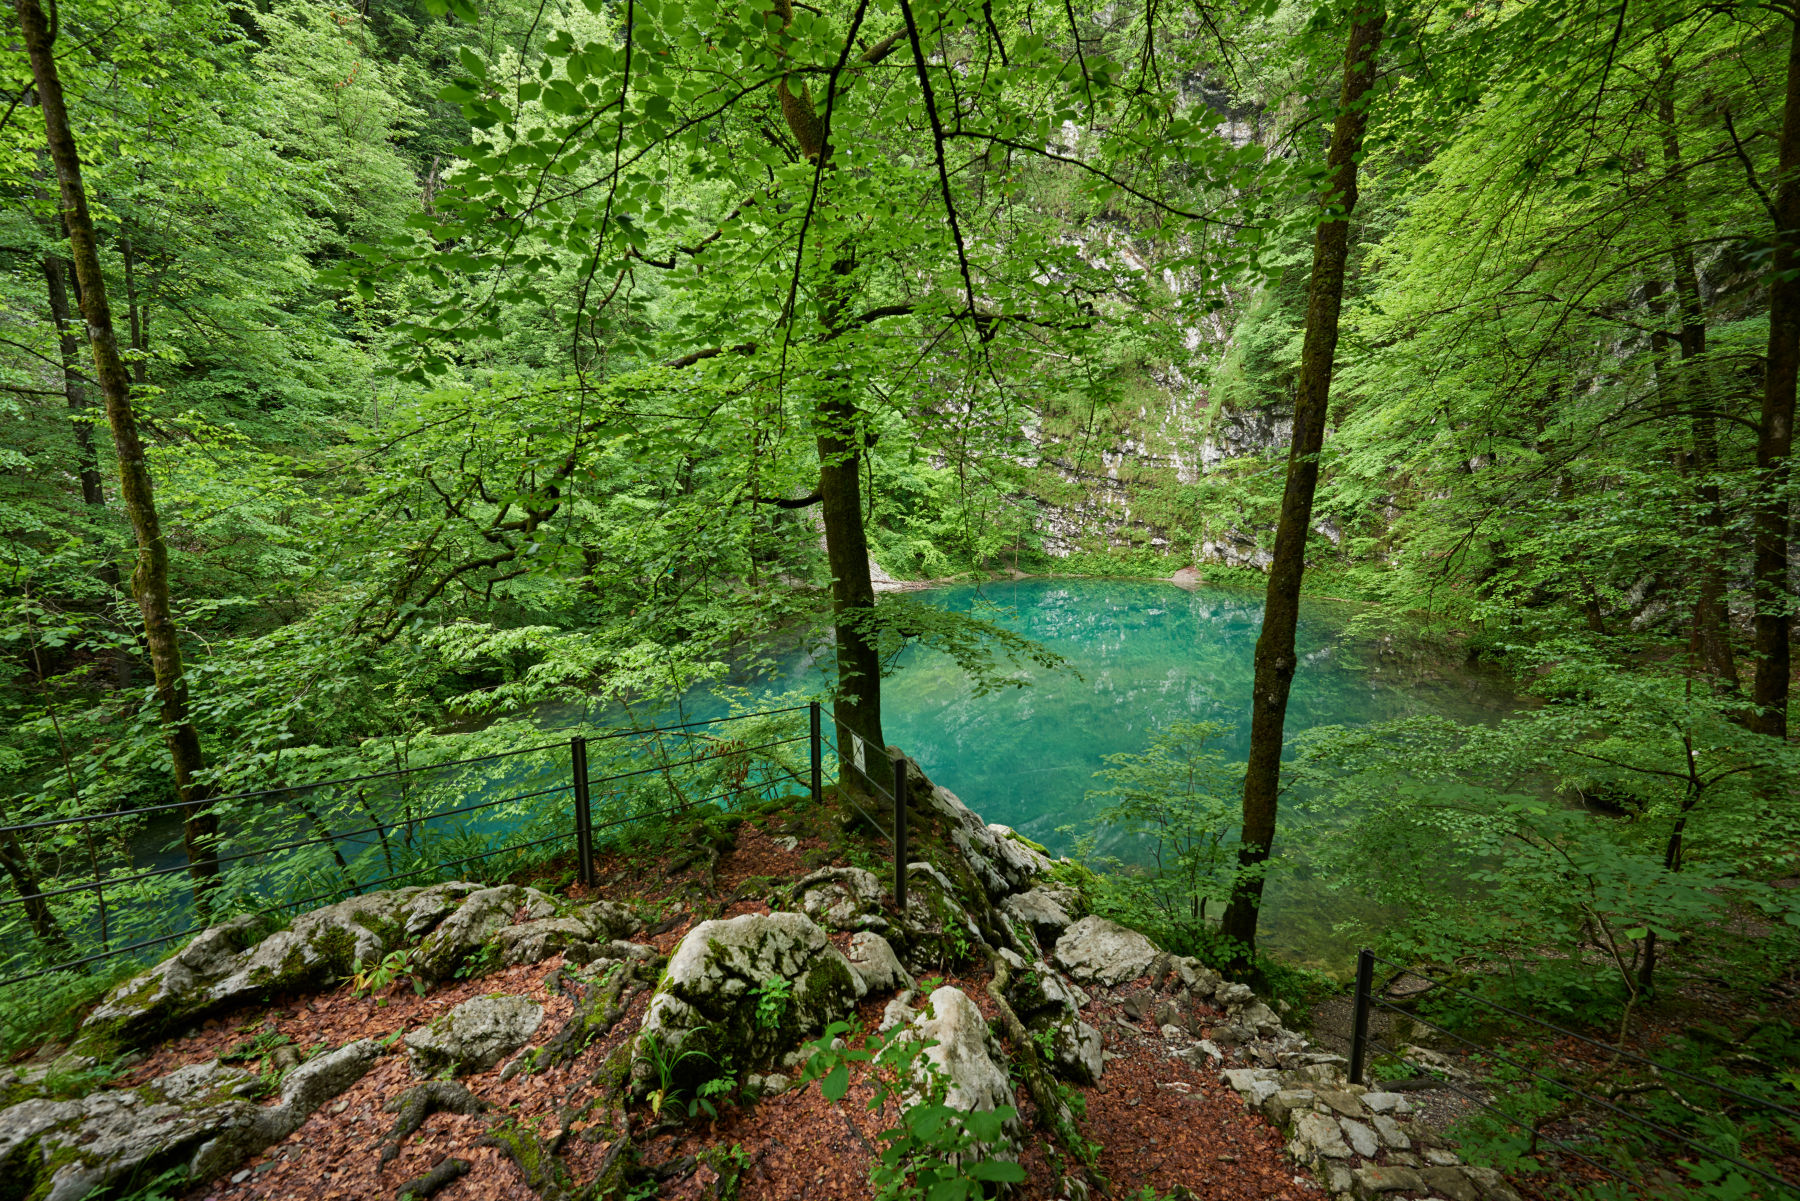 All You Need To Know To Visit The Wild Lake In Slovenia